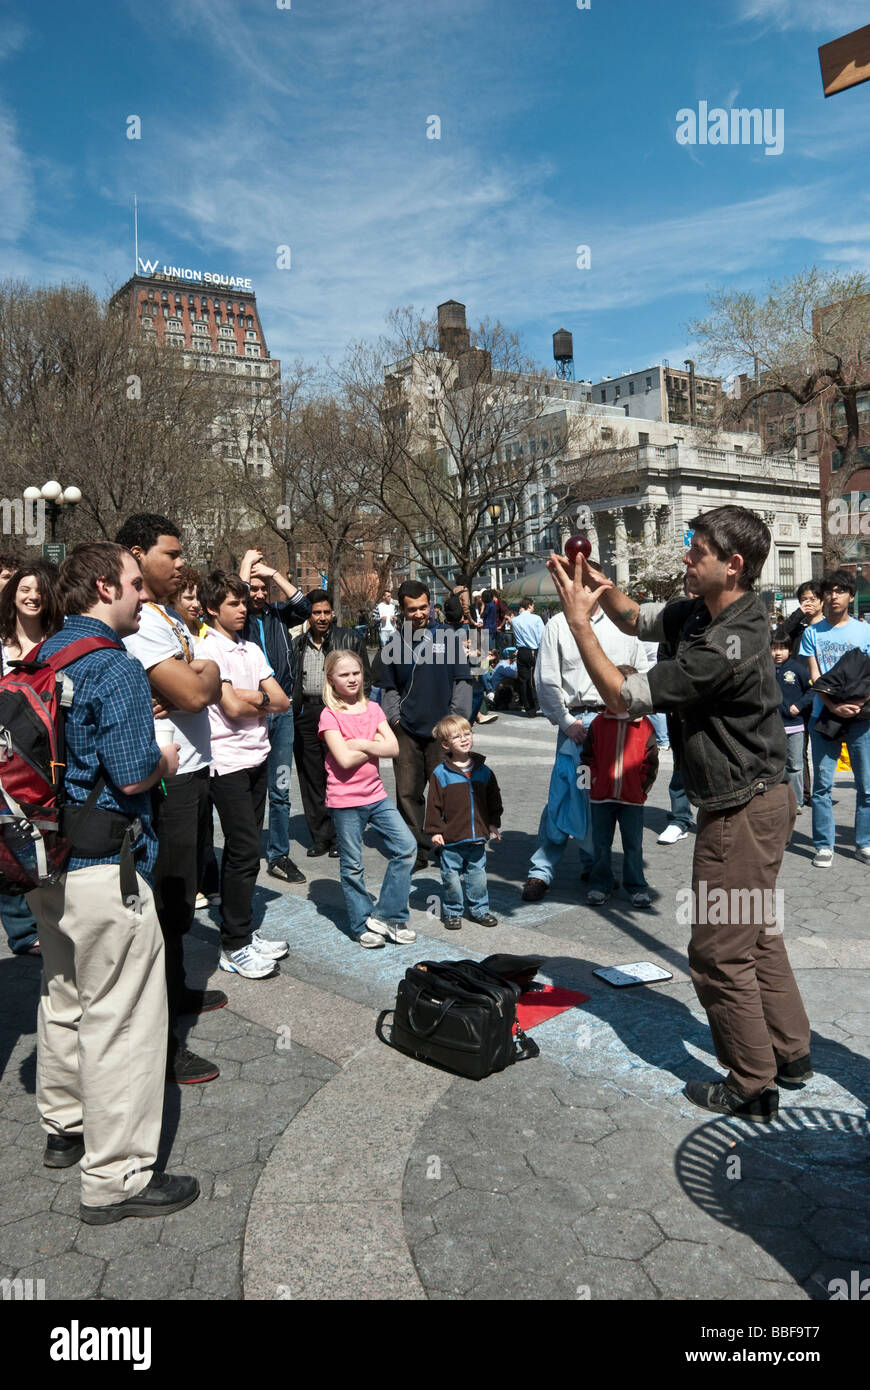 a crowd of young adults & children gather to watch a young man performing sleight of hand in Union Square park, New York City Stock Photo